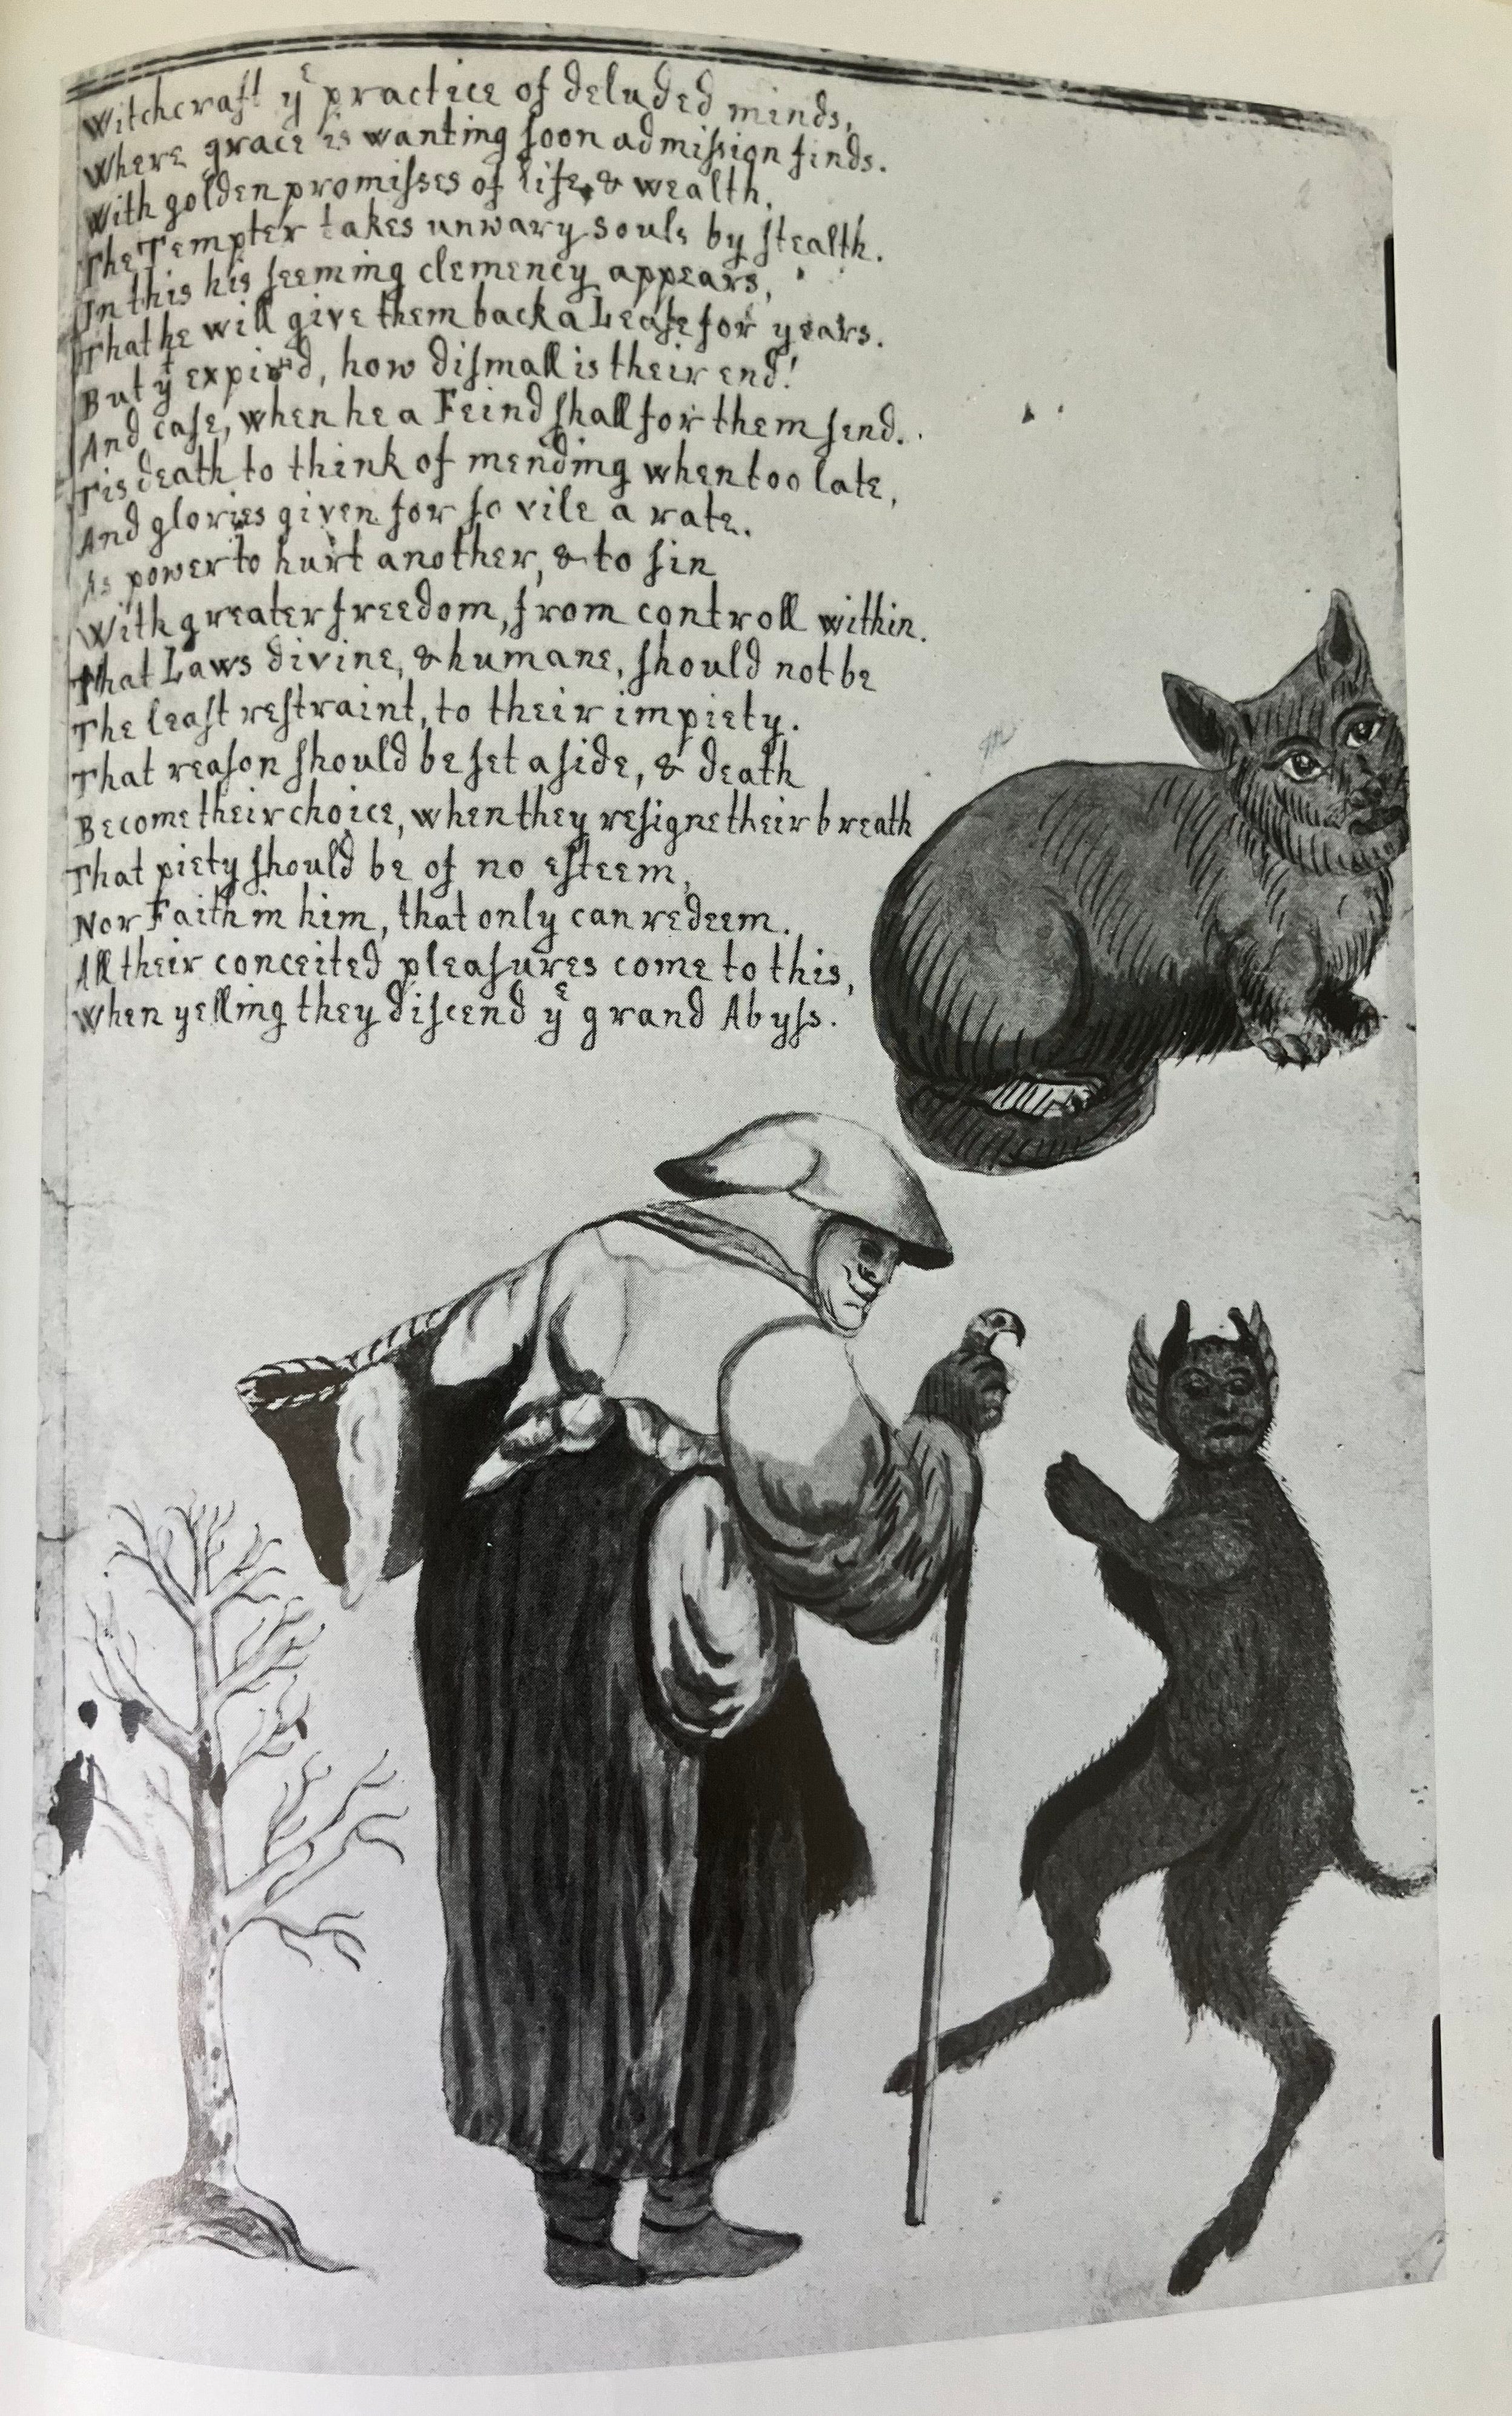 A witch and her familiars. From A Discourse of Witchcraft, 1621. Add MS 32496, f. 2. British Library, London.